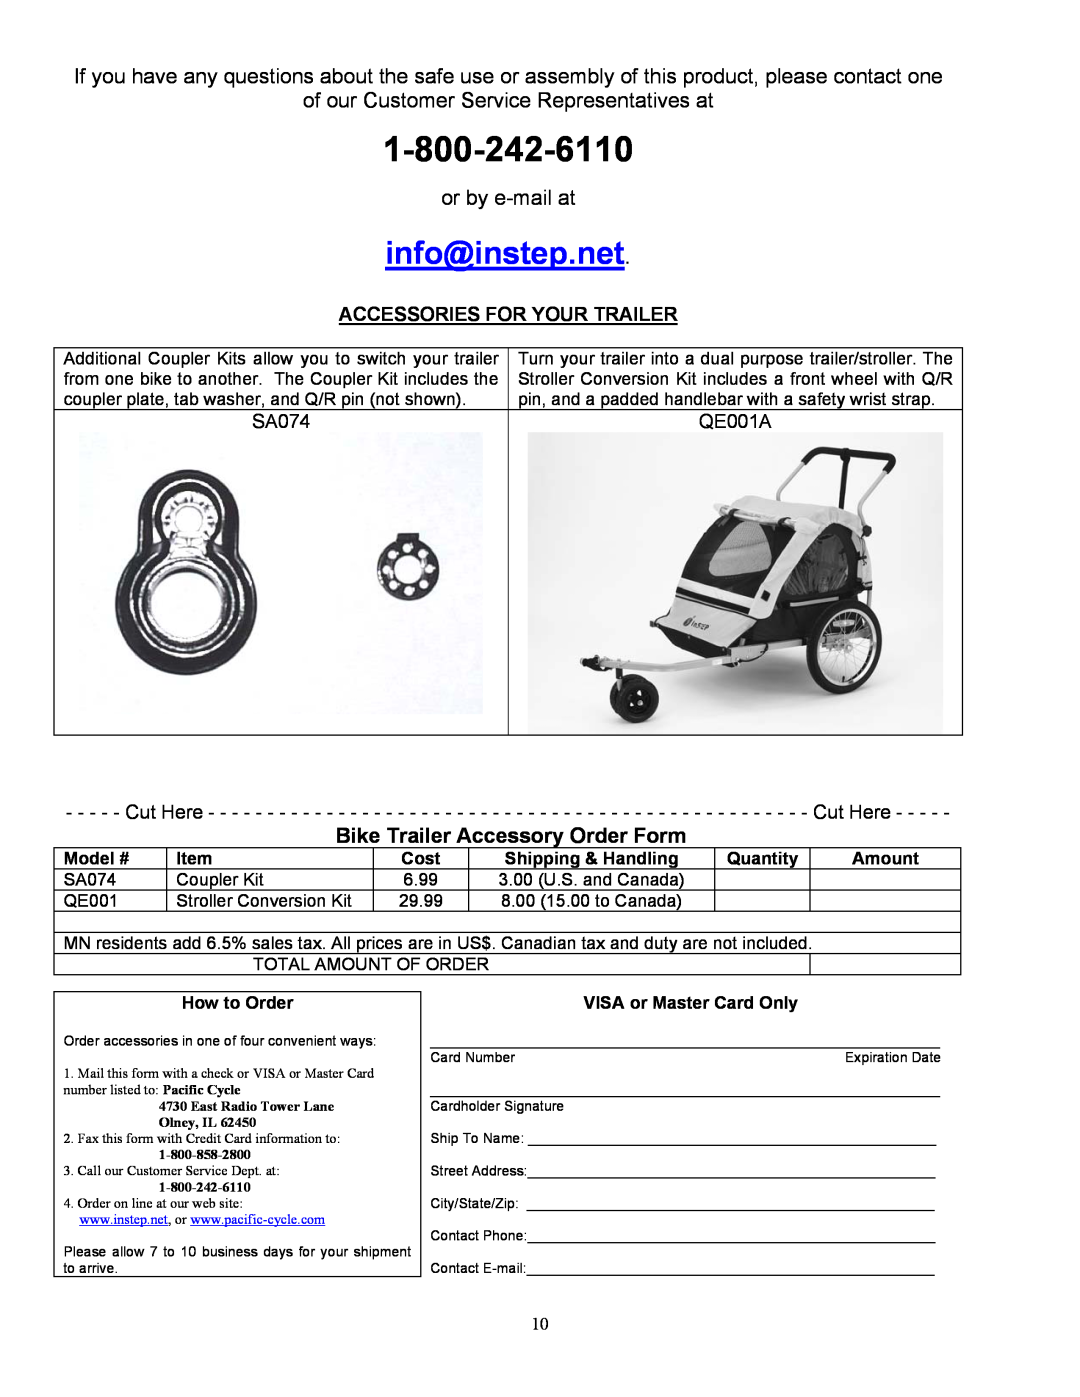 InStep QE100A Bike Trailer Accessory Order Form, info@instep.net, Accessories For Your Trailer, Model #, Cost, Quantity 